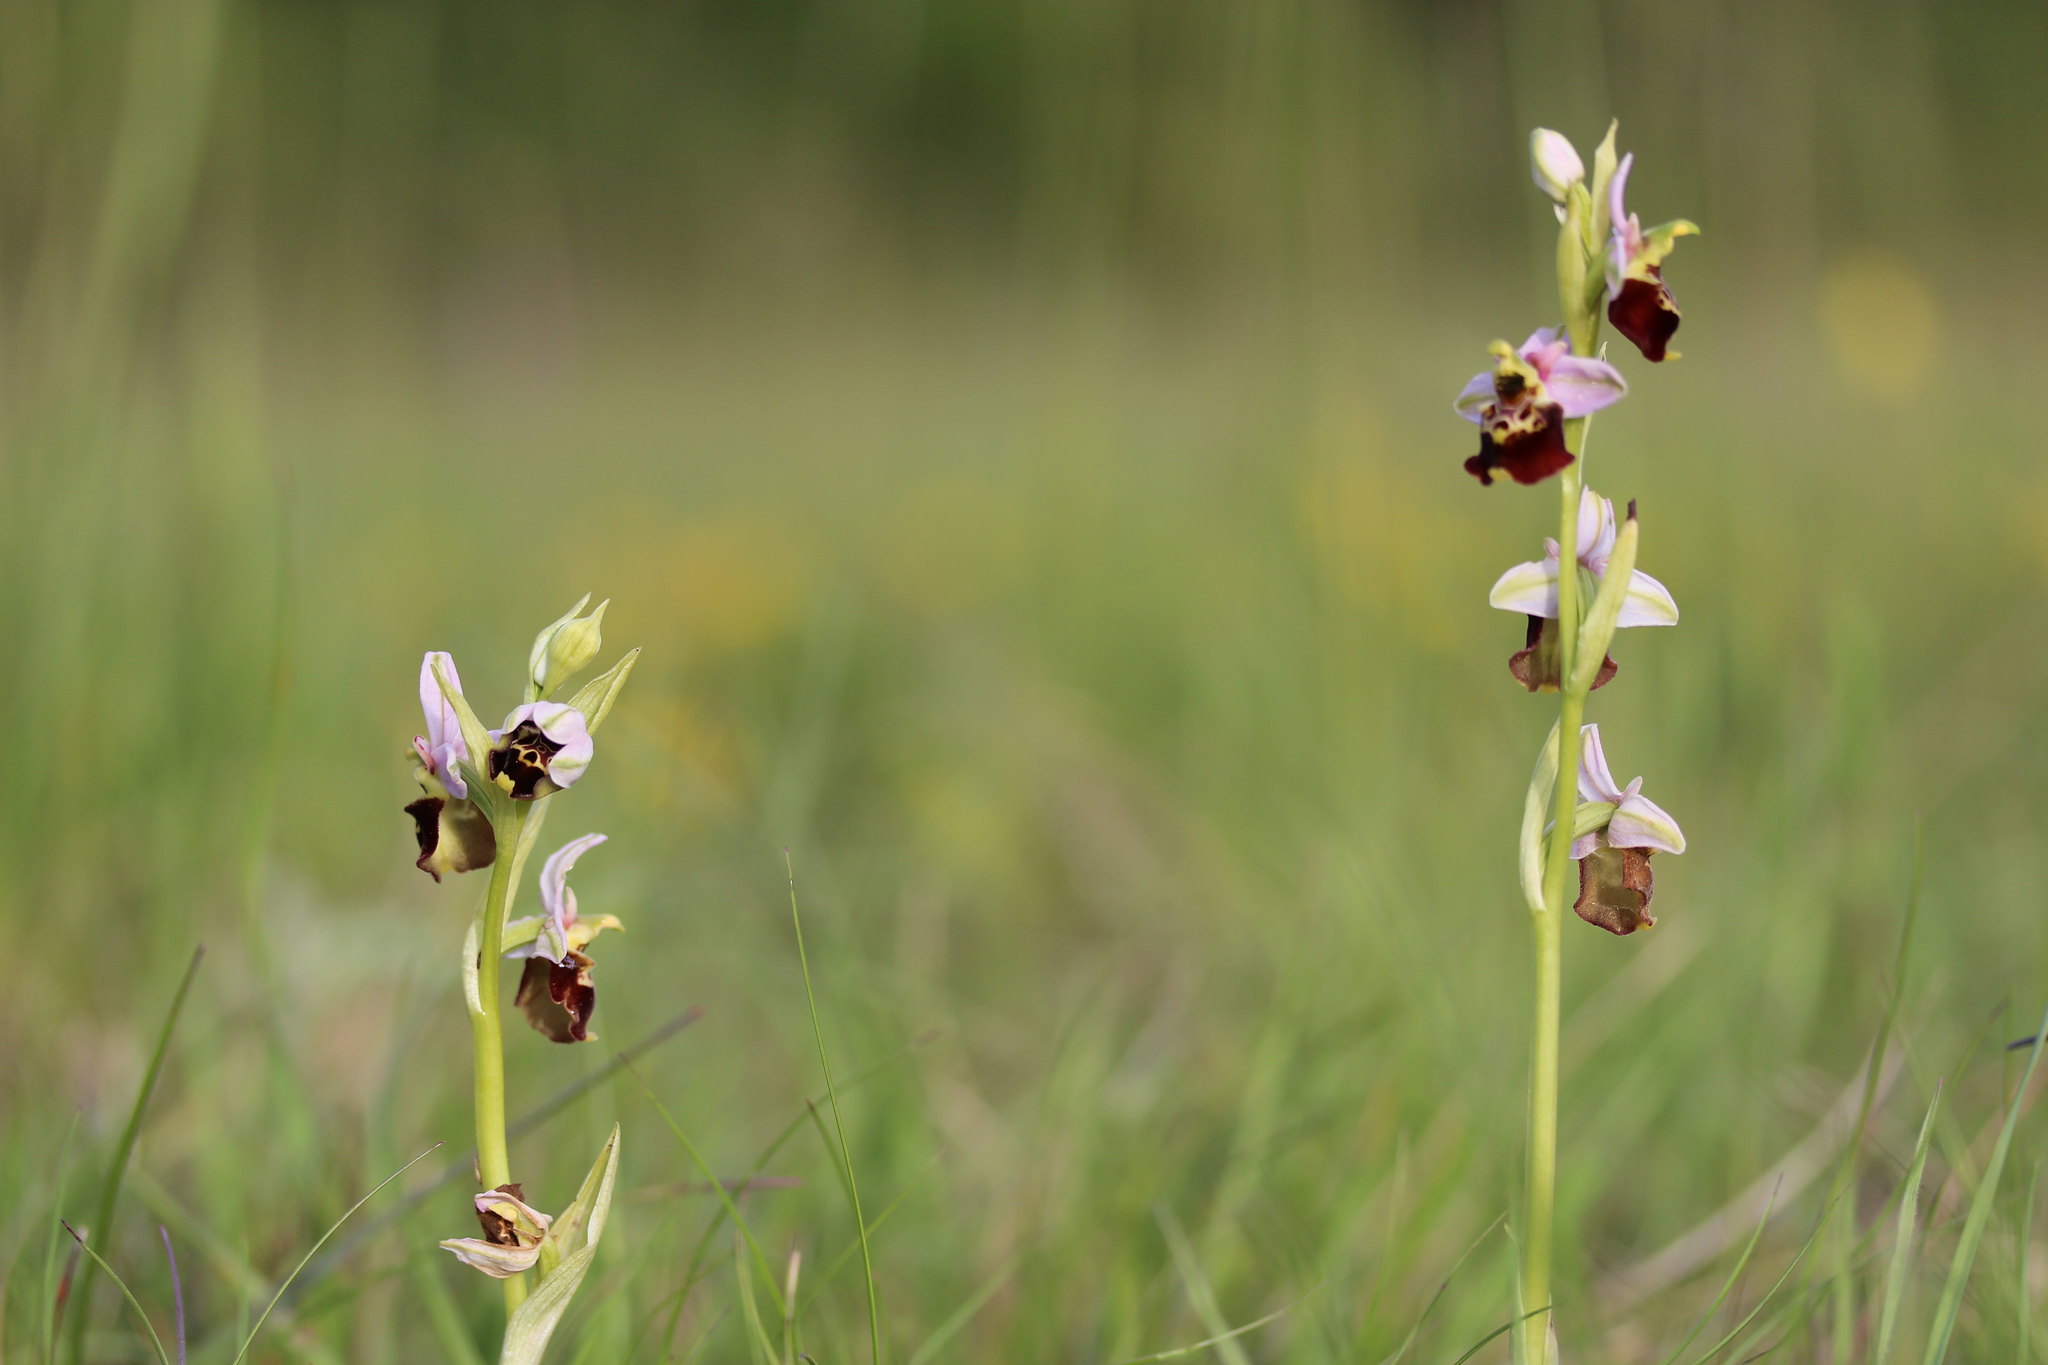 Two tall flowering stalks of late spider orchid each have several flowers. Each flower has three pink petals arranged around a single lower petal that has an ornate pattern in shades of brown and cream. 